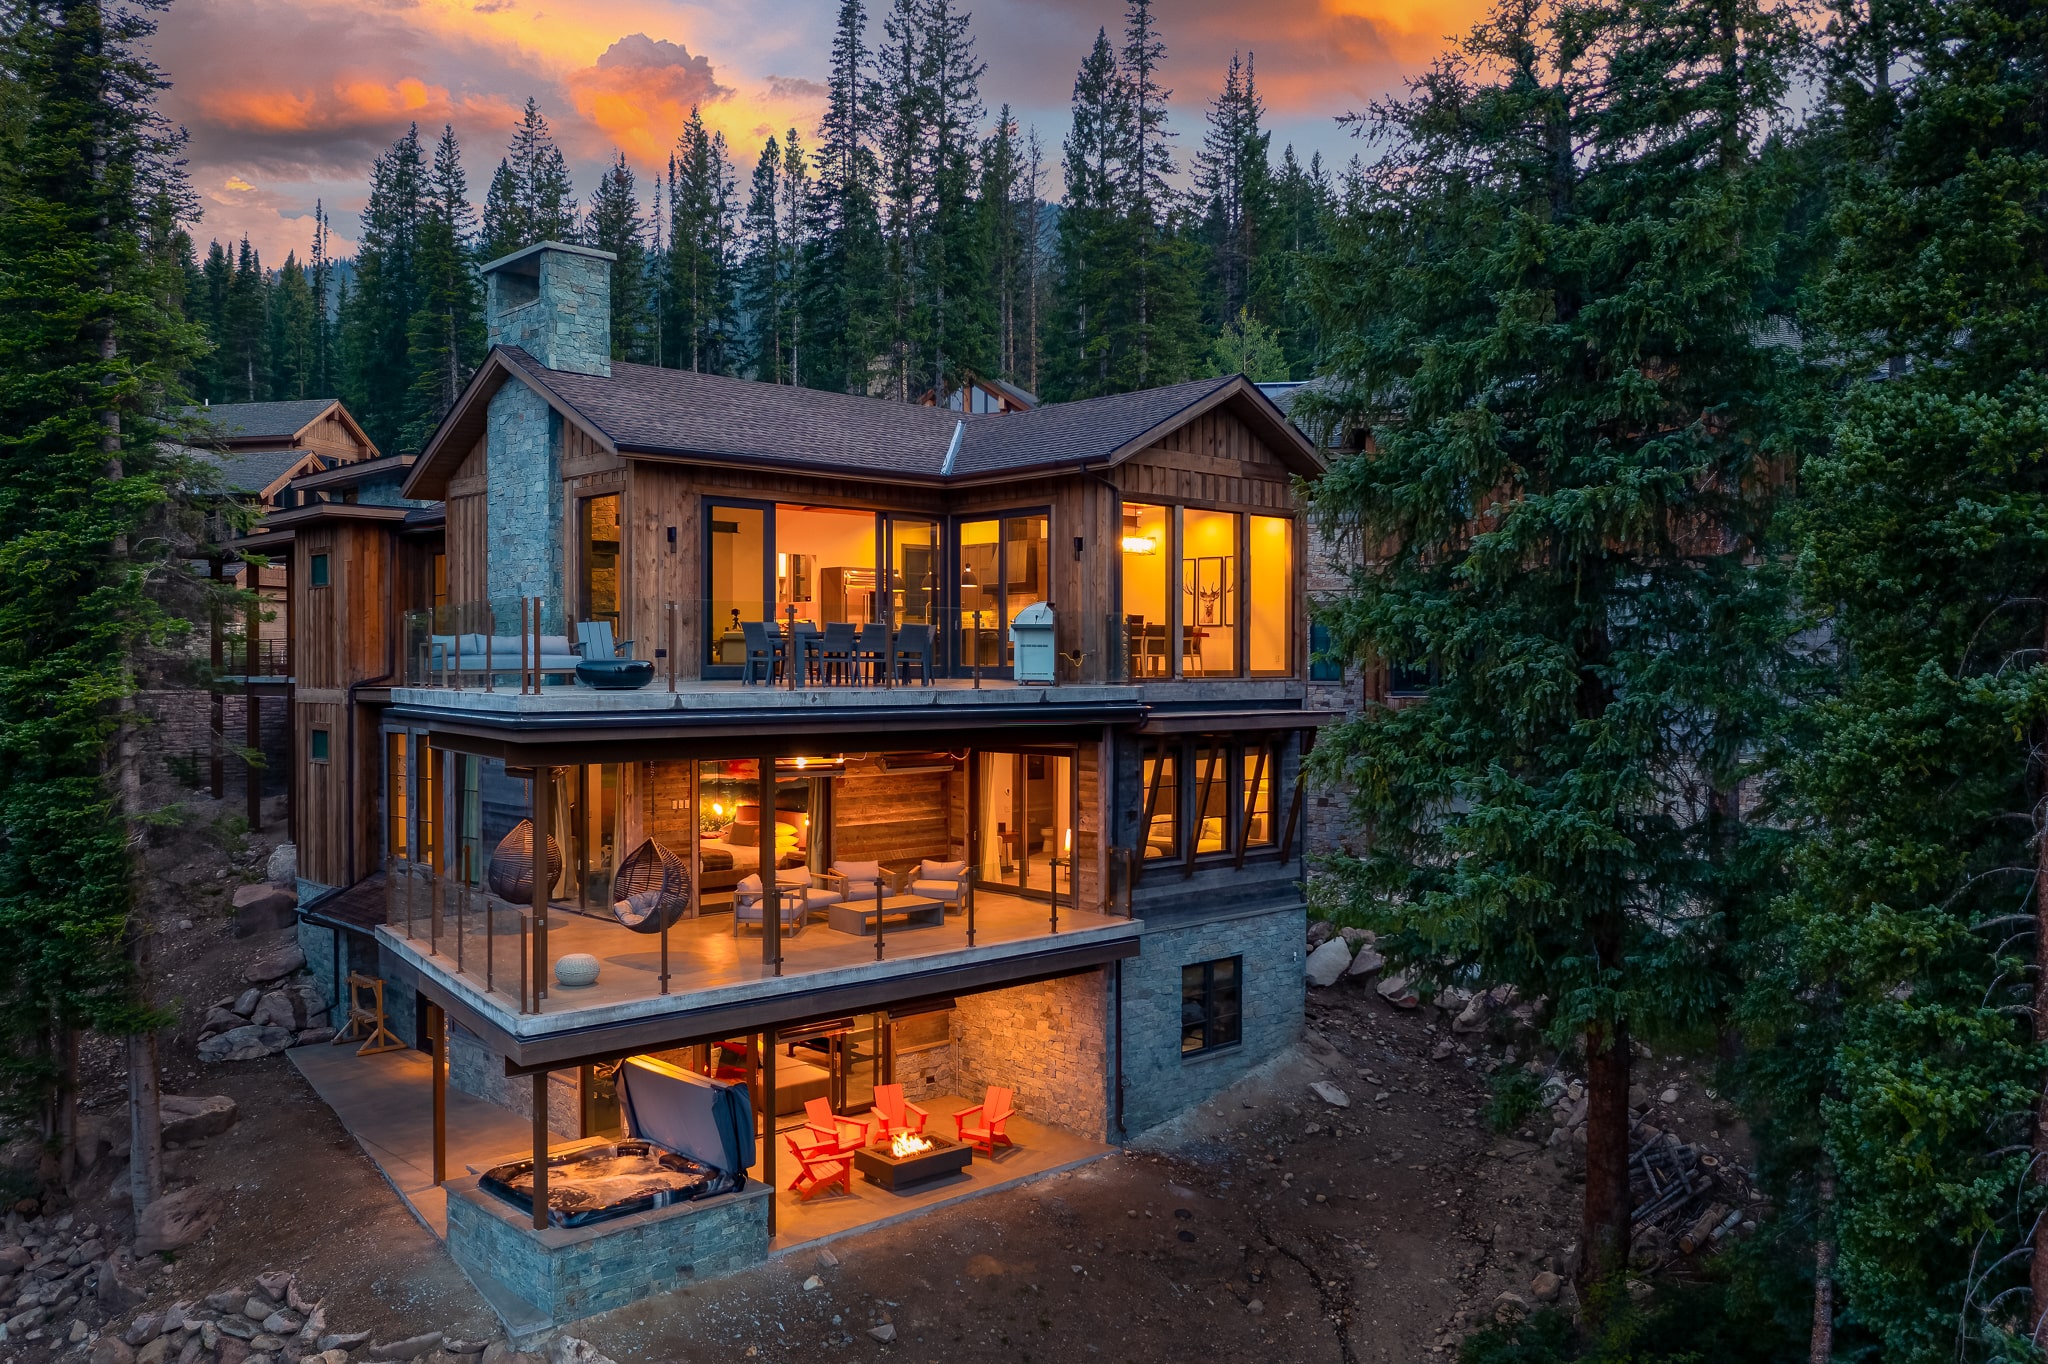 Winter Park, Colorado – “Trestle House” is a jaw-dropping ski-in/ski-out home. The mountain views, high-end amenities and elegant furnishings make for a luxurious ski vacation.